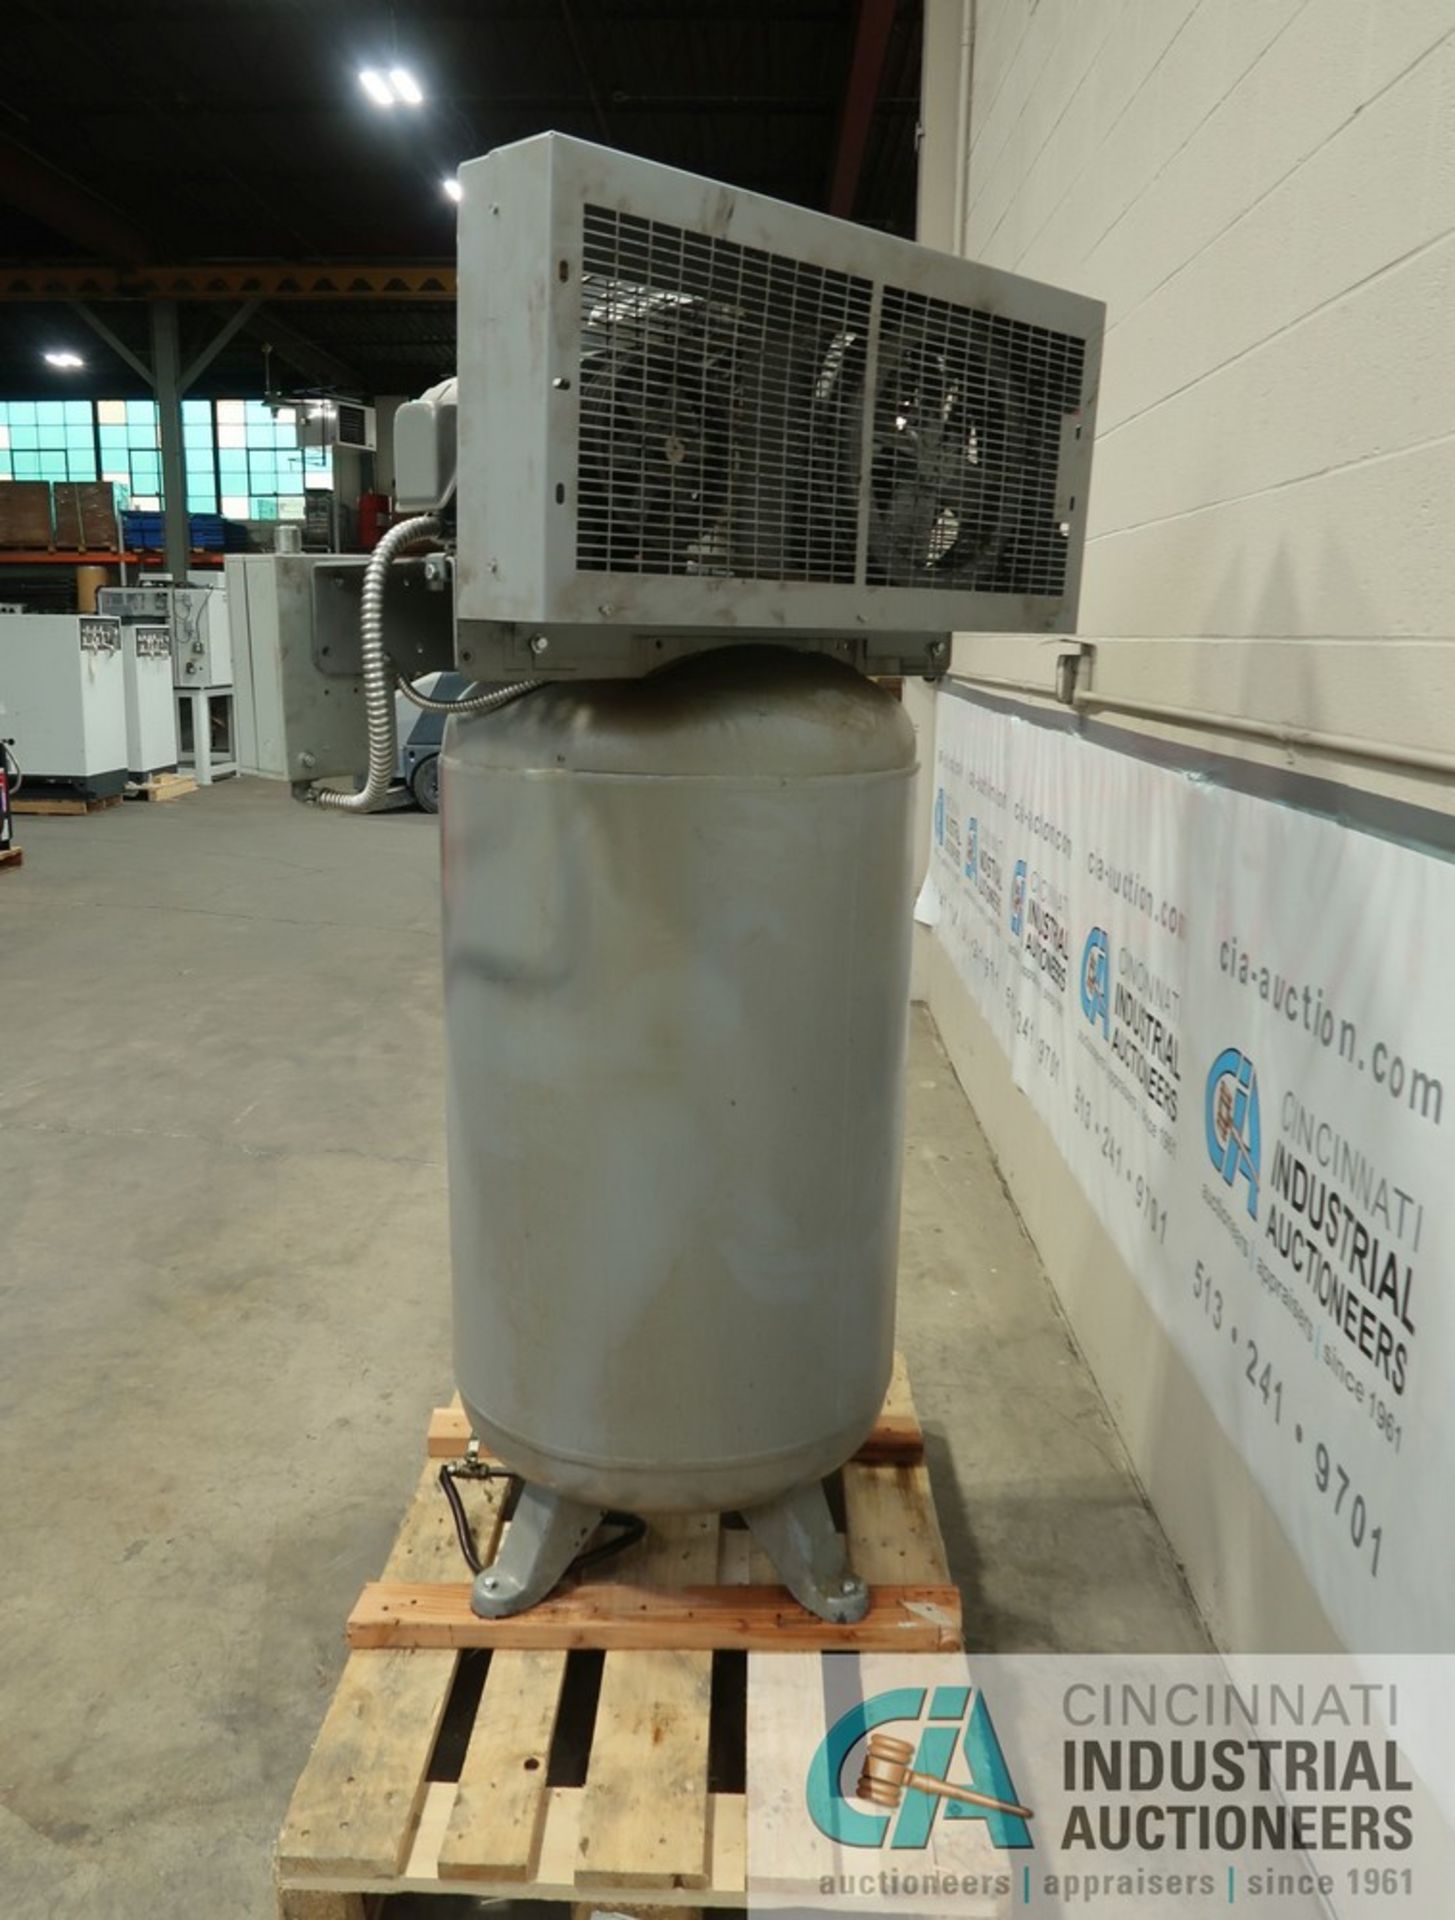 INGERSOLL RAND MODEL T30 VERTICAL TANK AIR COMPRESSOR; S/N 30T661006, 3-PHASE, 200 VOLTS, 5 HP MOTOR - Image 2 of 8